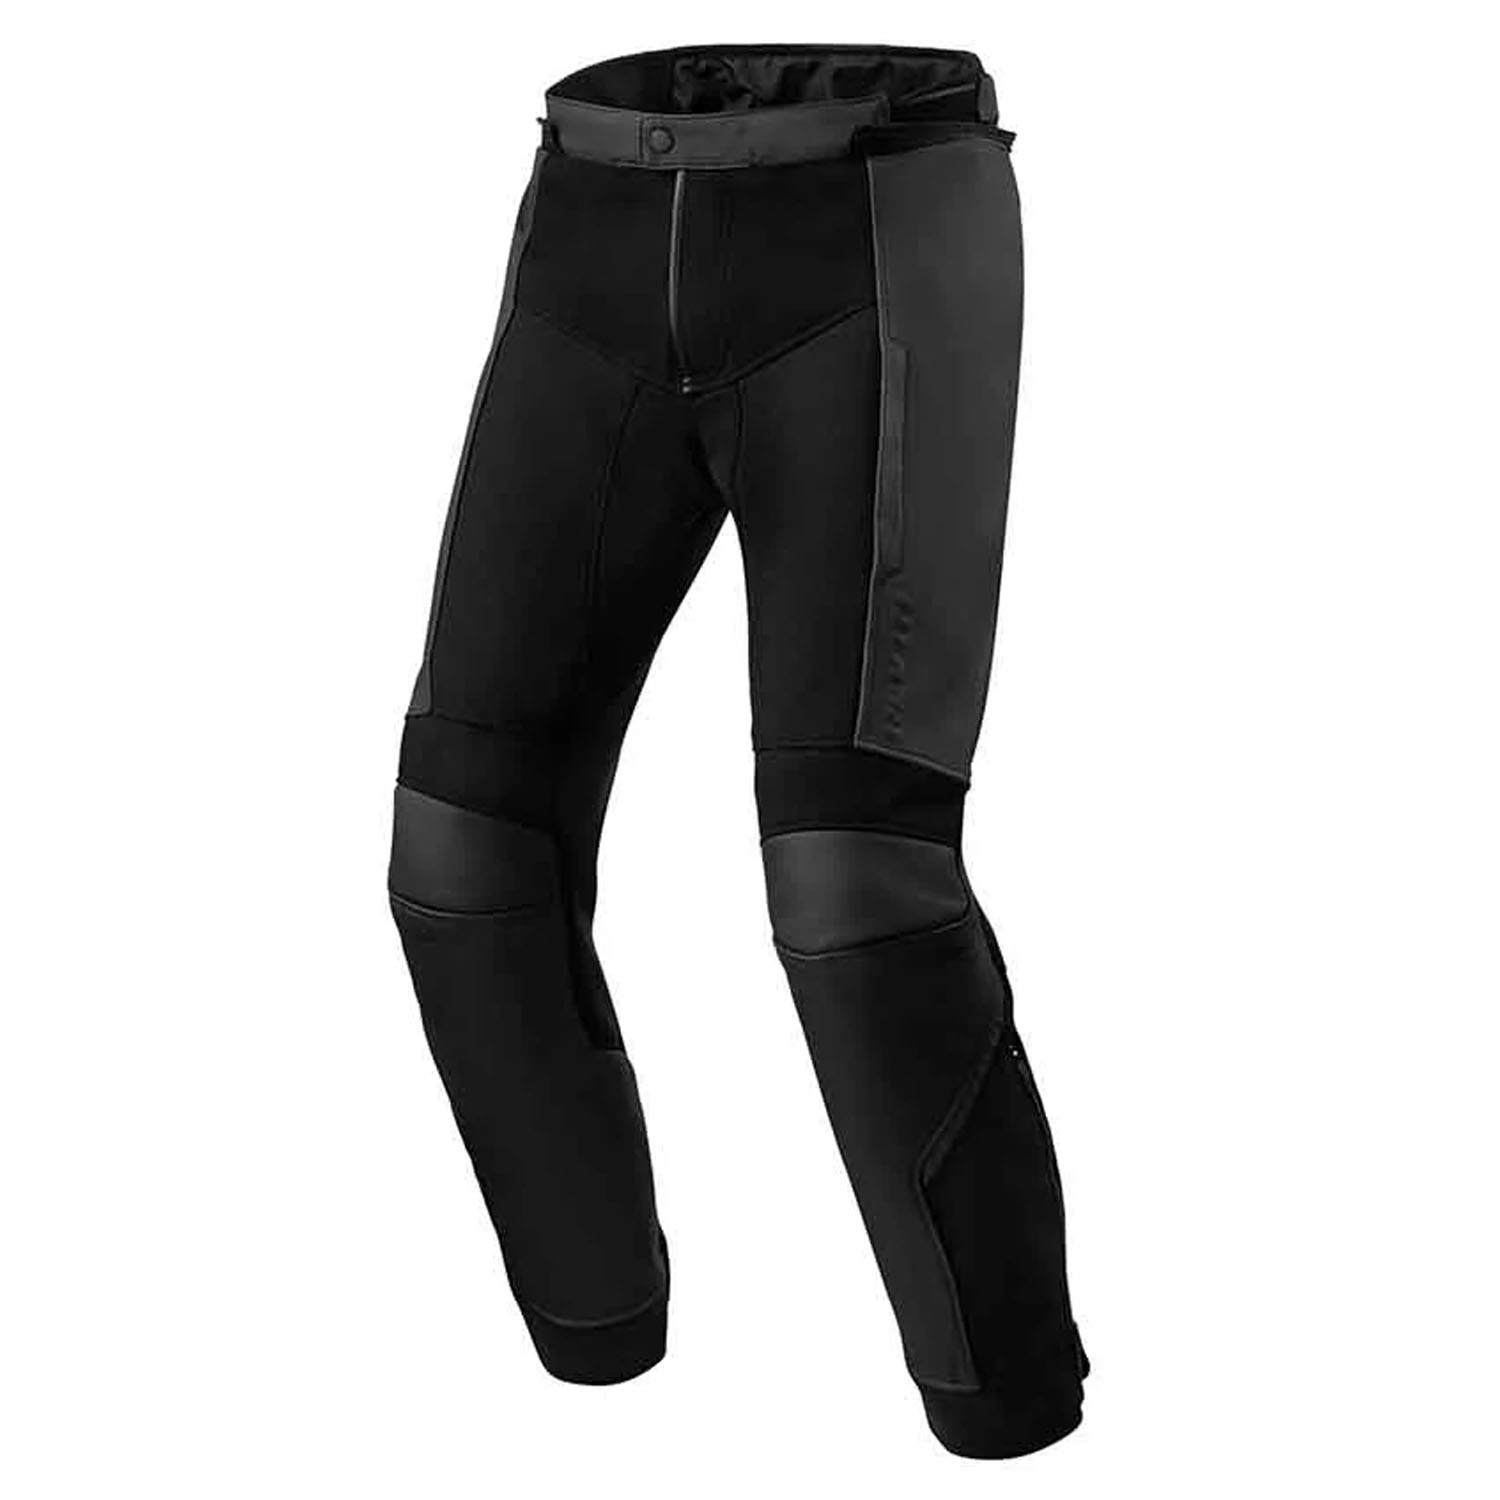 Image of REV'IT! Ignition 4 H2O Black Short Motorcycle Pants Size 56 ID 8700001359368